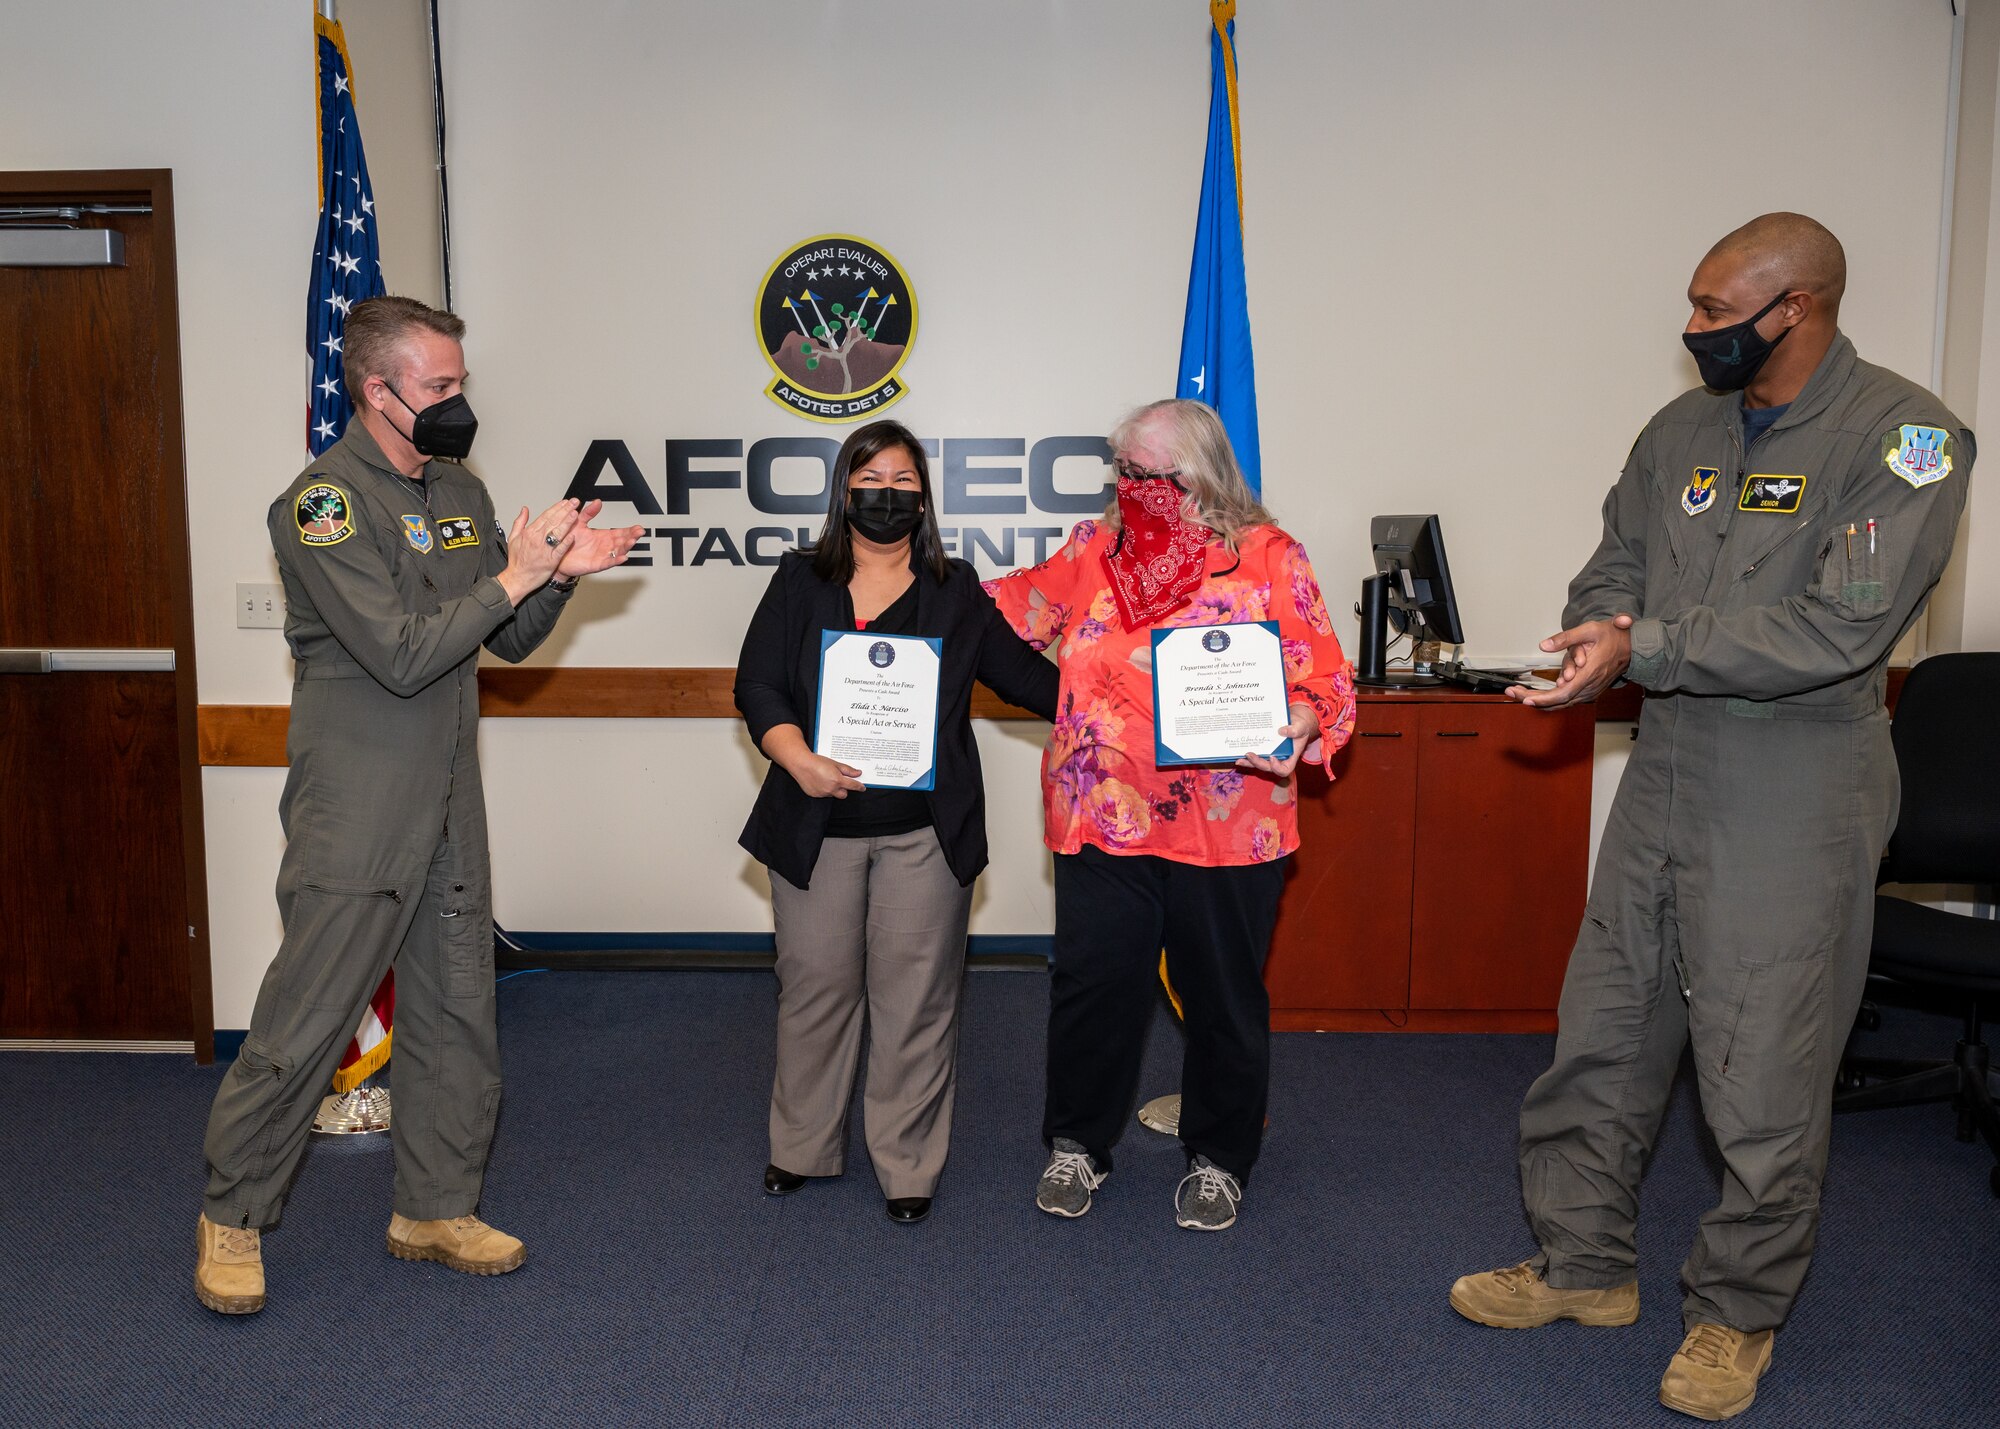 The Air Force Operational Test and Evaluation Center, Detachment 5, commander, Col. Glenn Rineheart, and senior enlisted leader, Senior Master Sgt. Brian Pettaway, congratulate teammates Elida Narciso and Brenda Johnston after receiving a special award for their actions resulting in saving a fellow team member's life, at Edwards Air Force Base, California, Dec. 3. (Air Force photo by Giancarlo Casem)